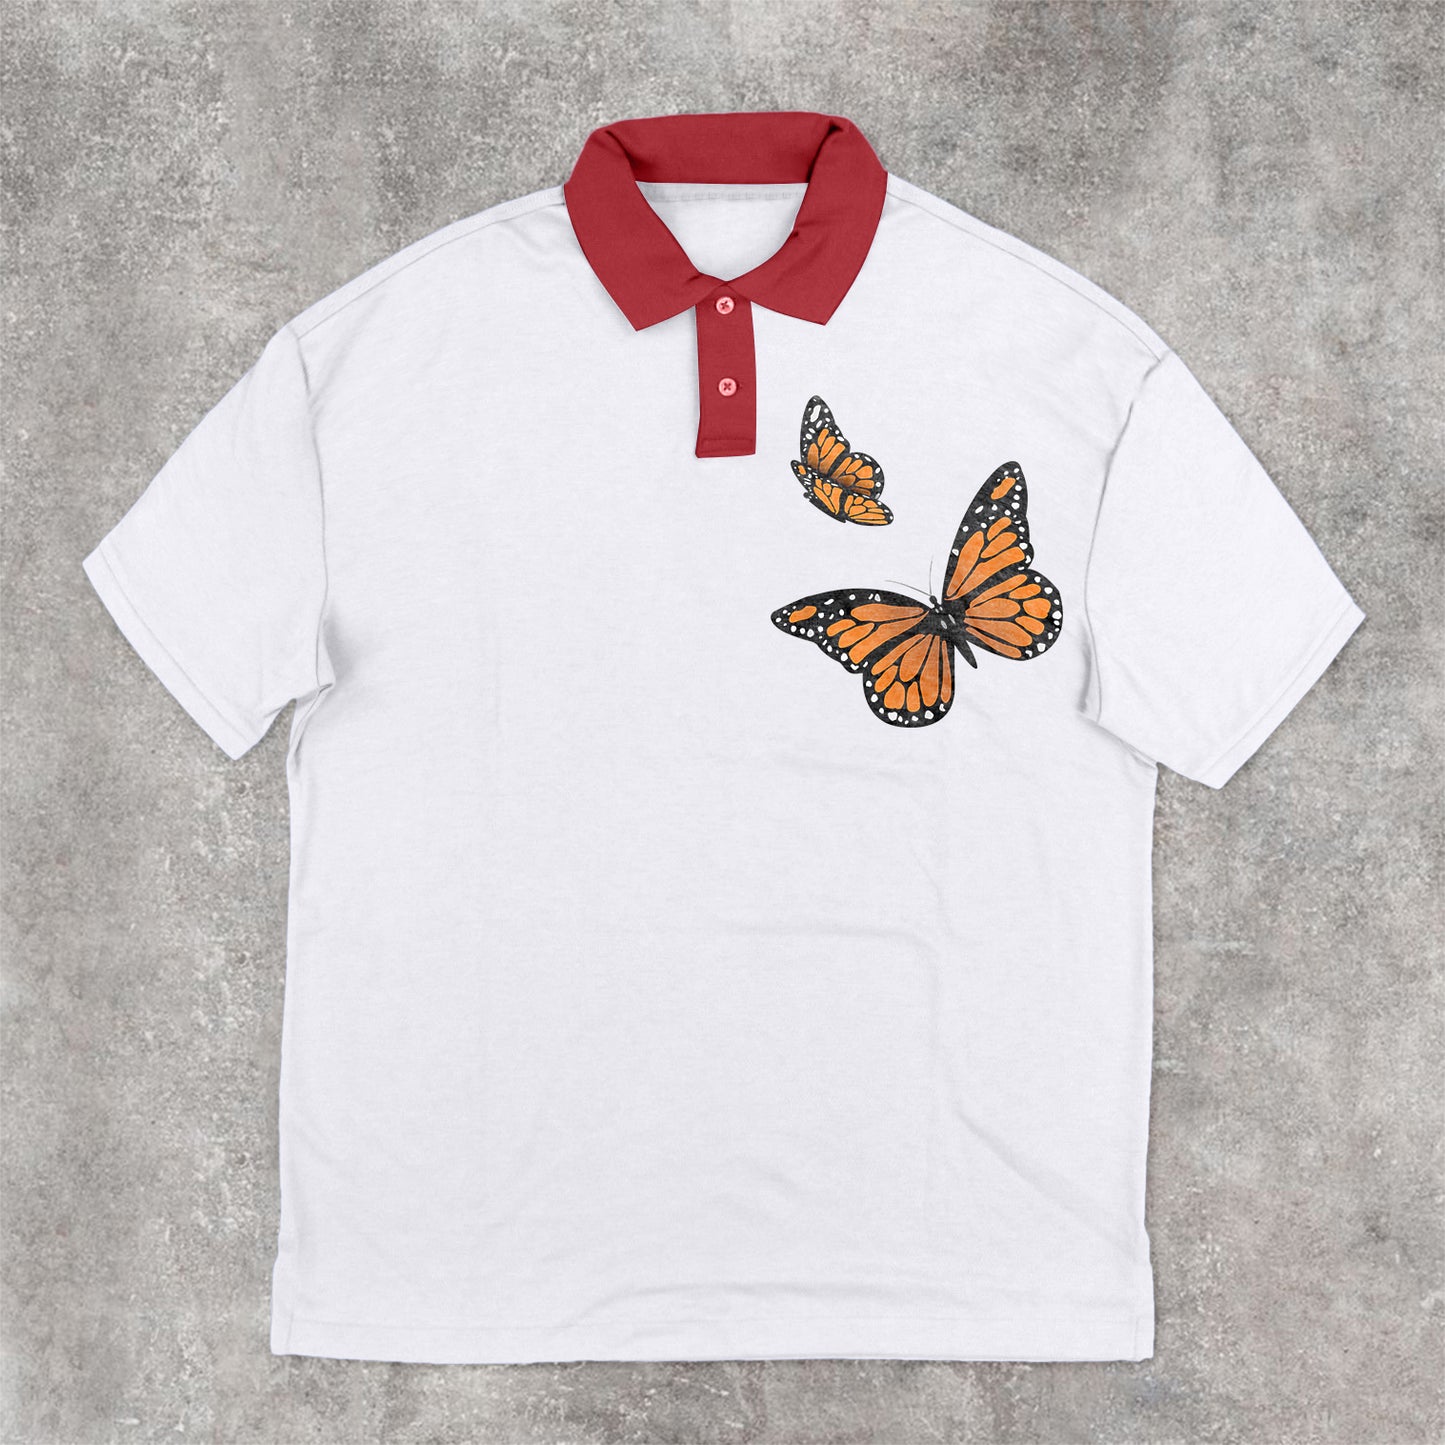 Preppy Fashion Vintage Butterfly Polo Shirt